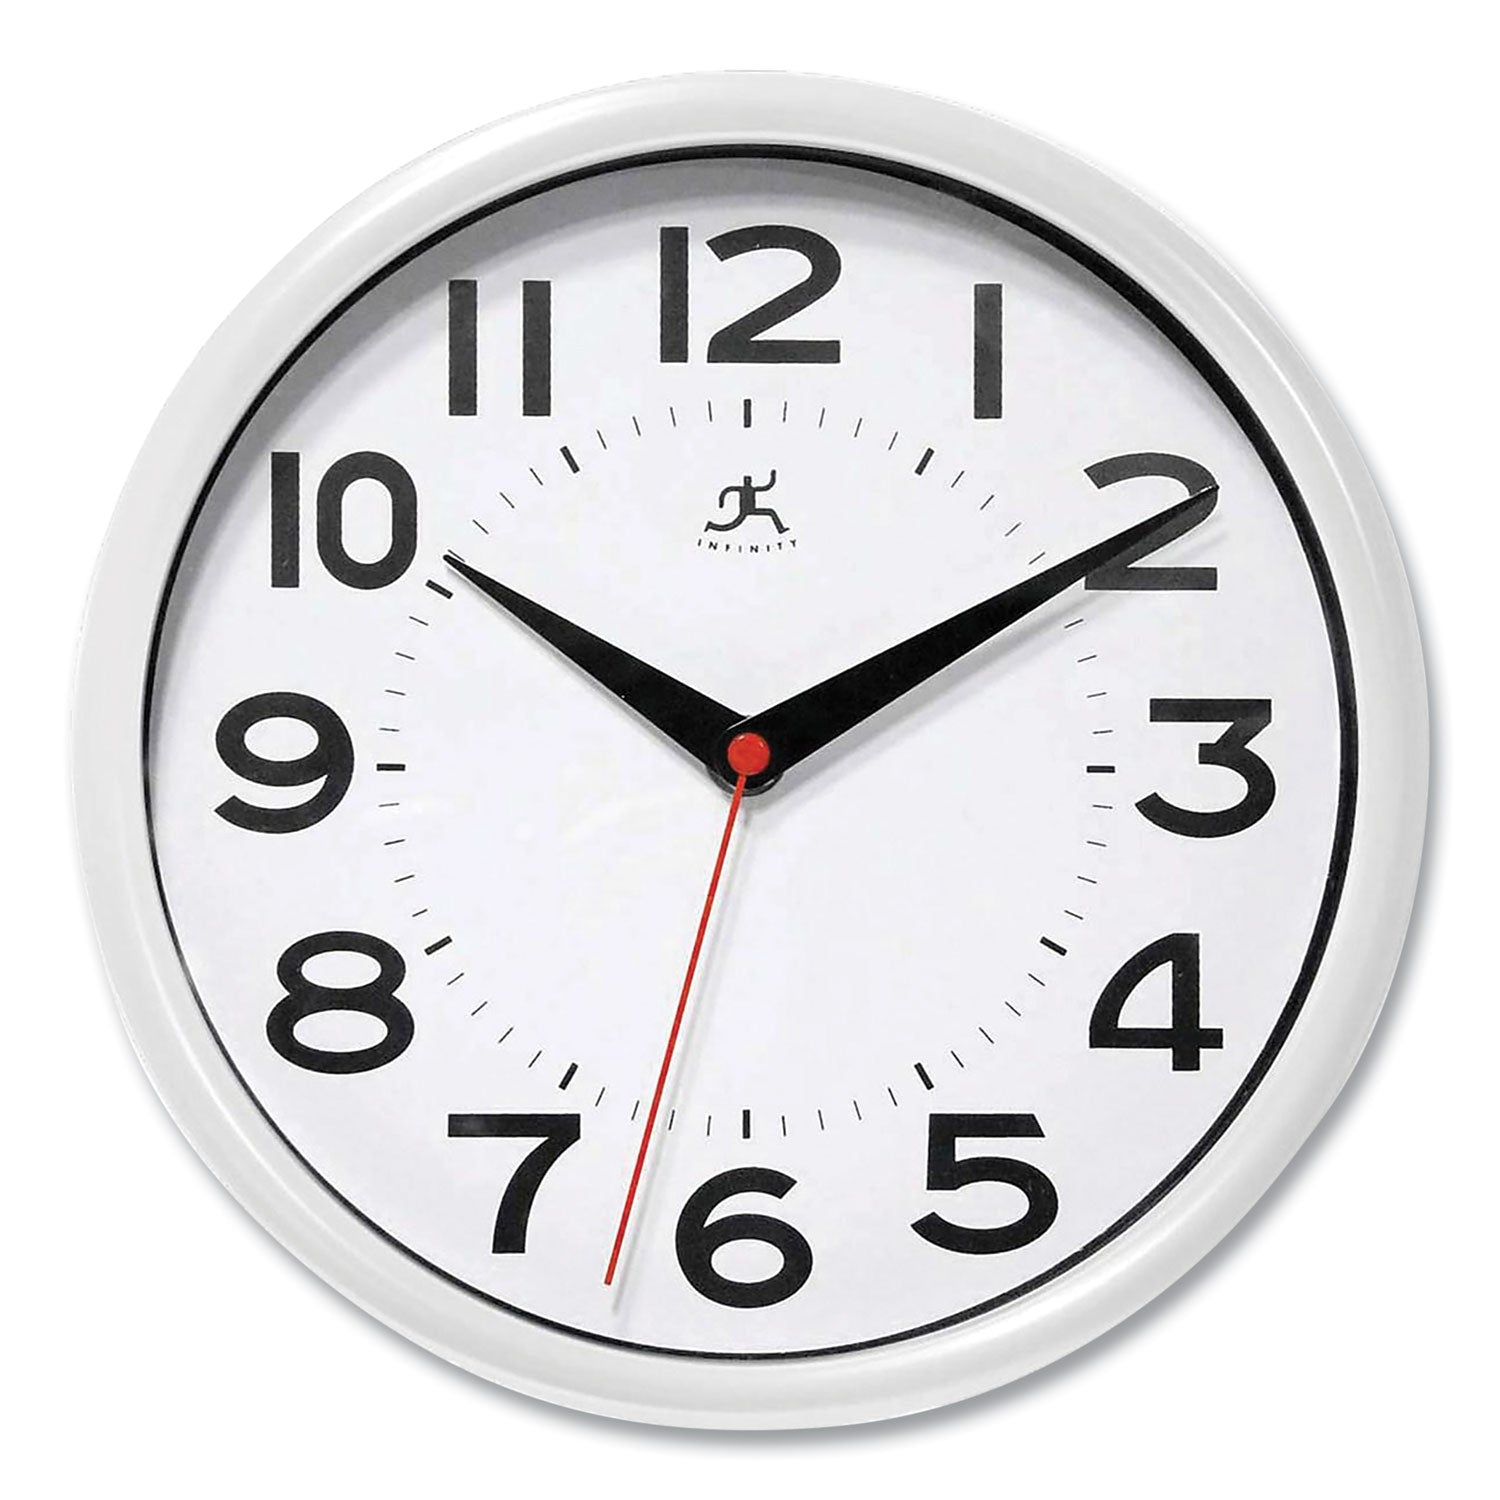 metro-wall-clock-9-diameter-white-case-1-aa-sold-separately_ifm14220wh3364 - 1